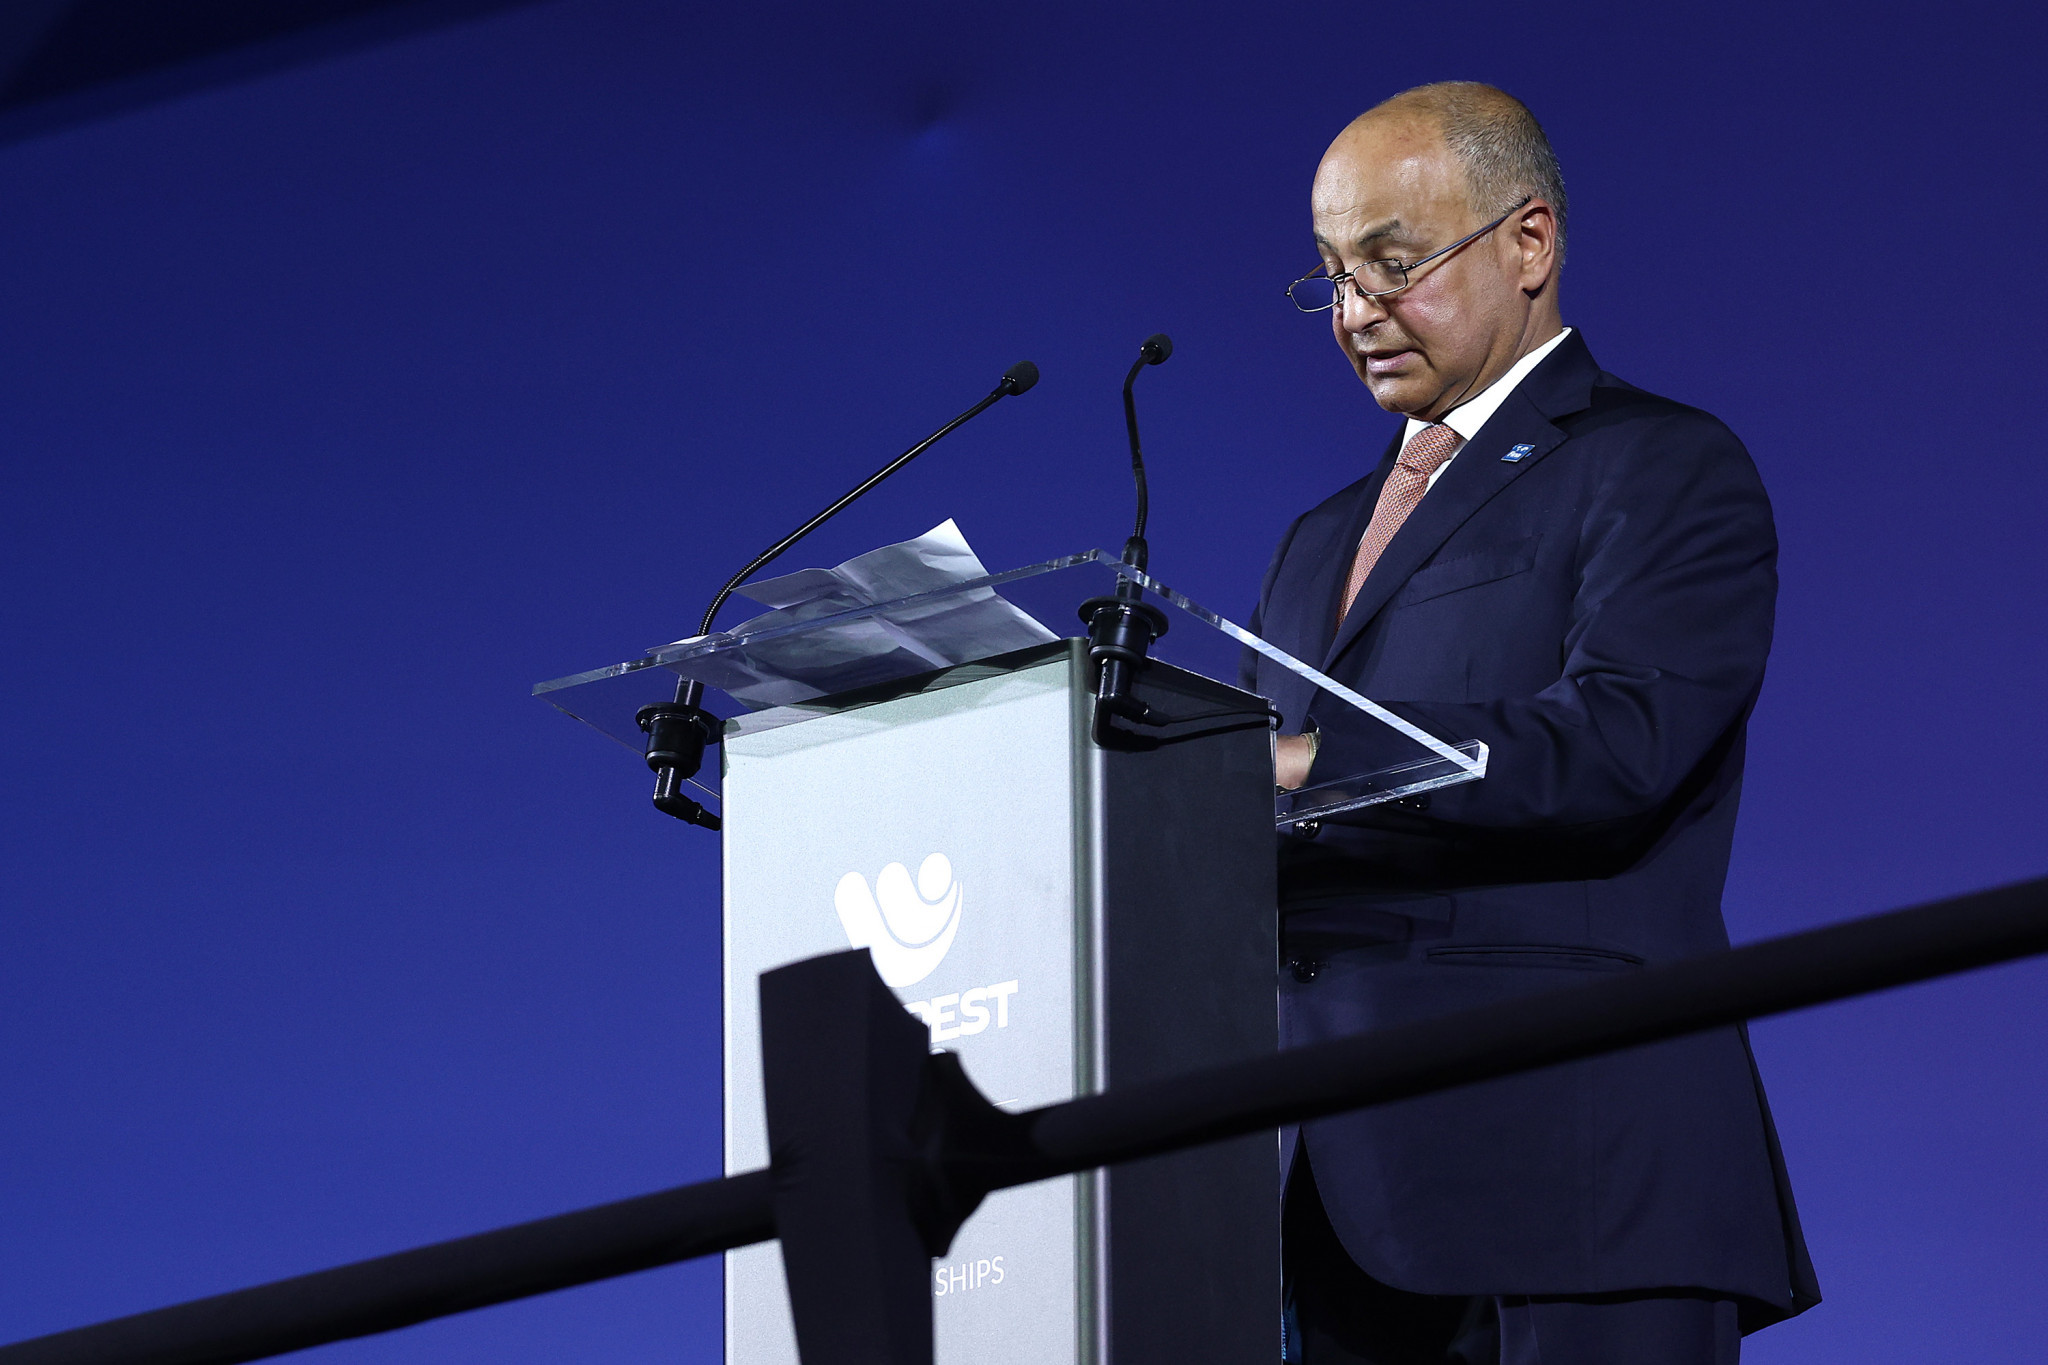 FINA President Husain Al-Musallam said that staging Swimming and Diving World Cups in Berlin would help 